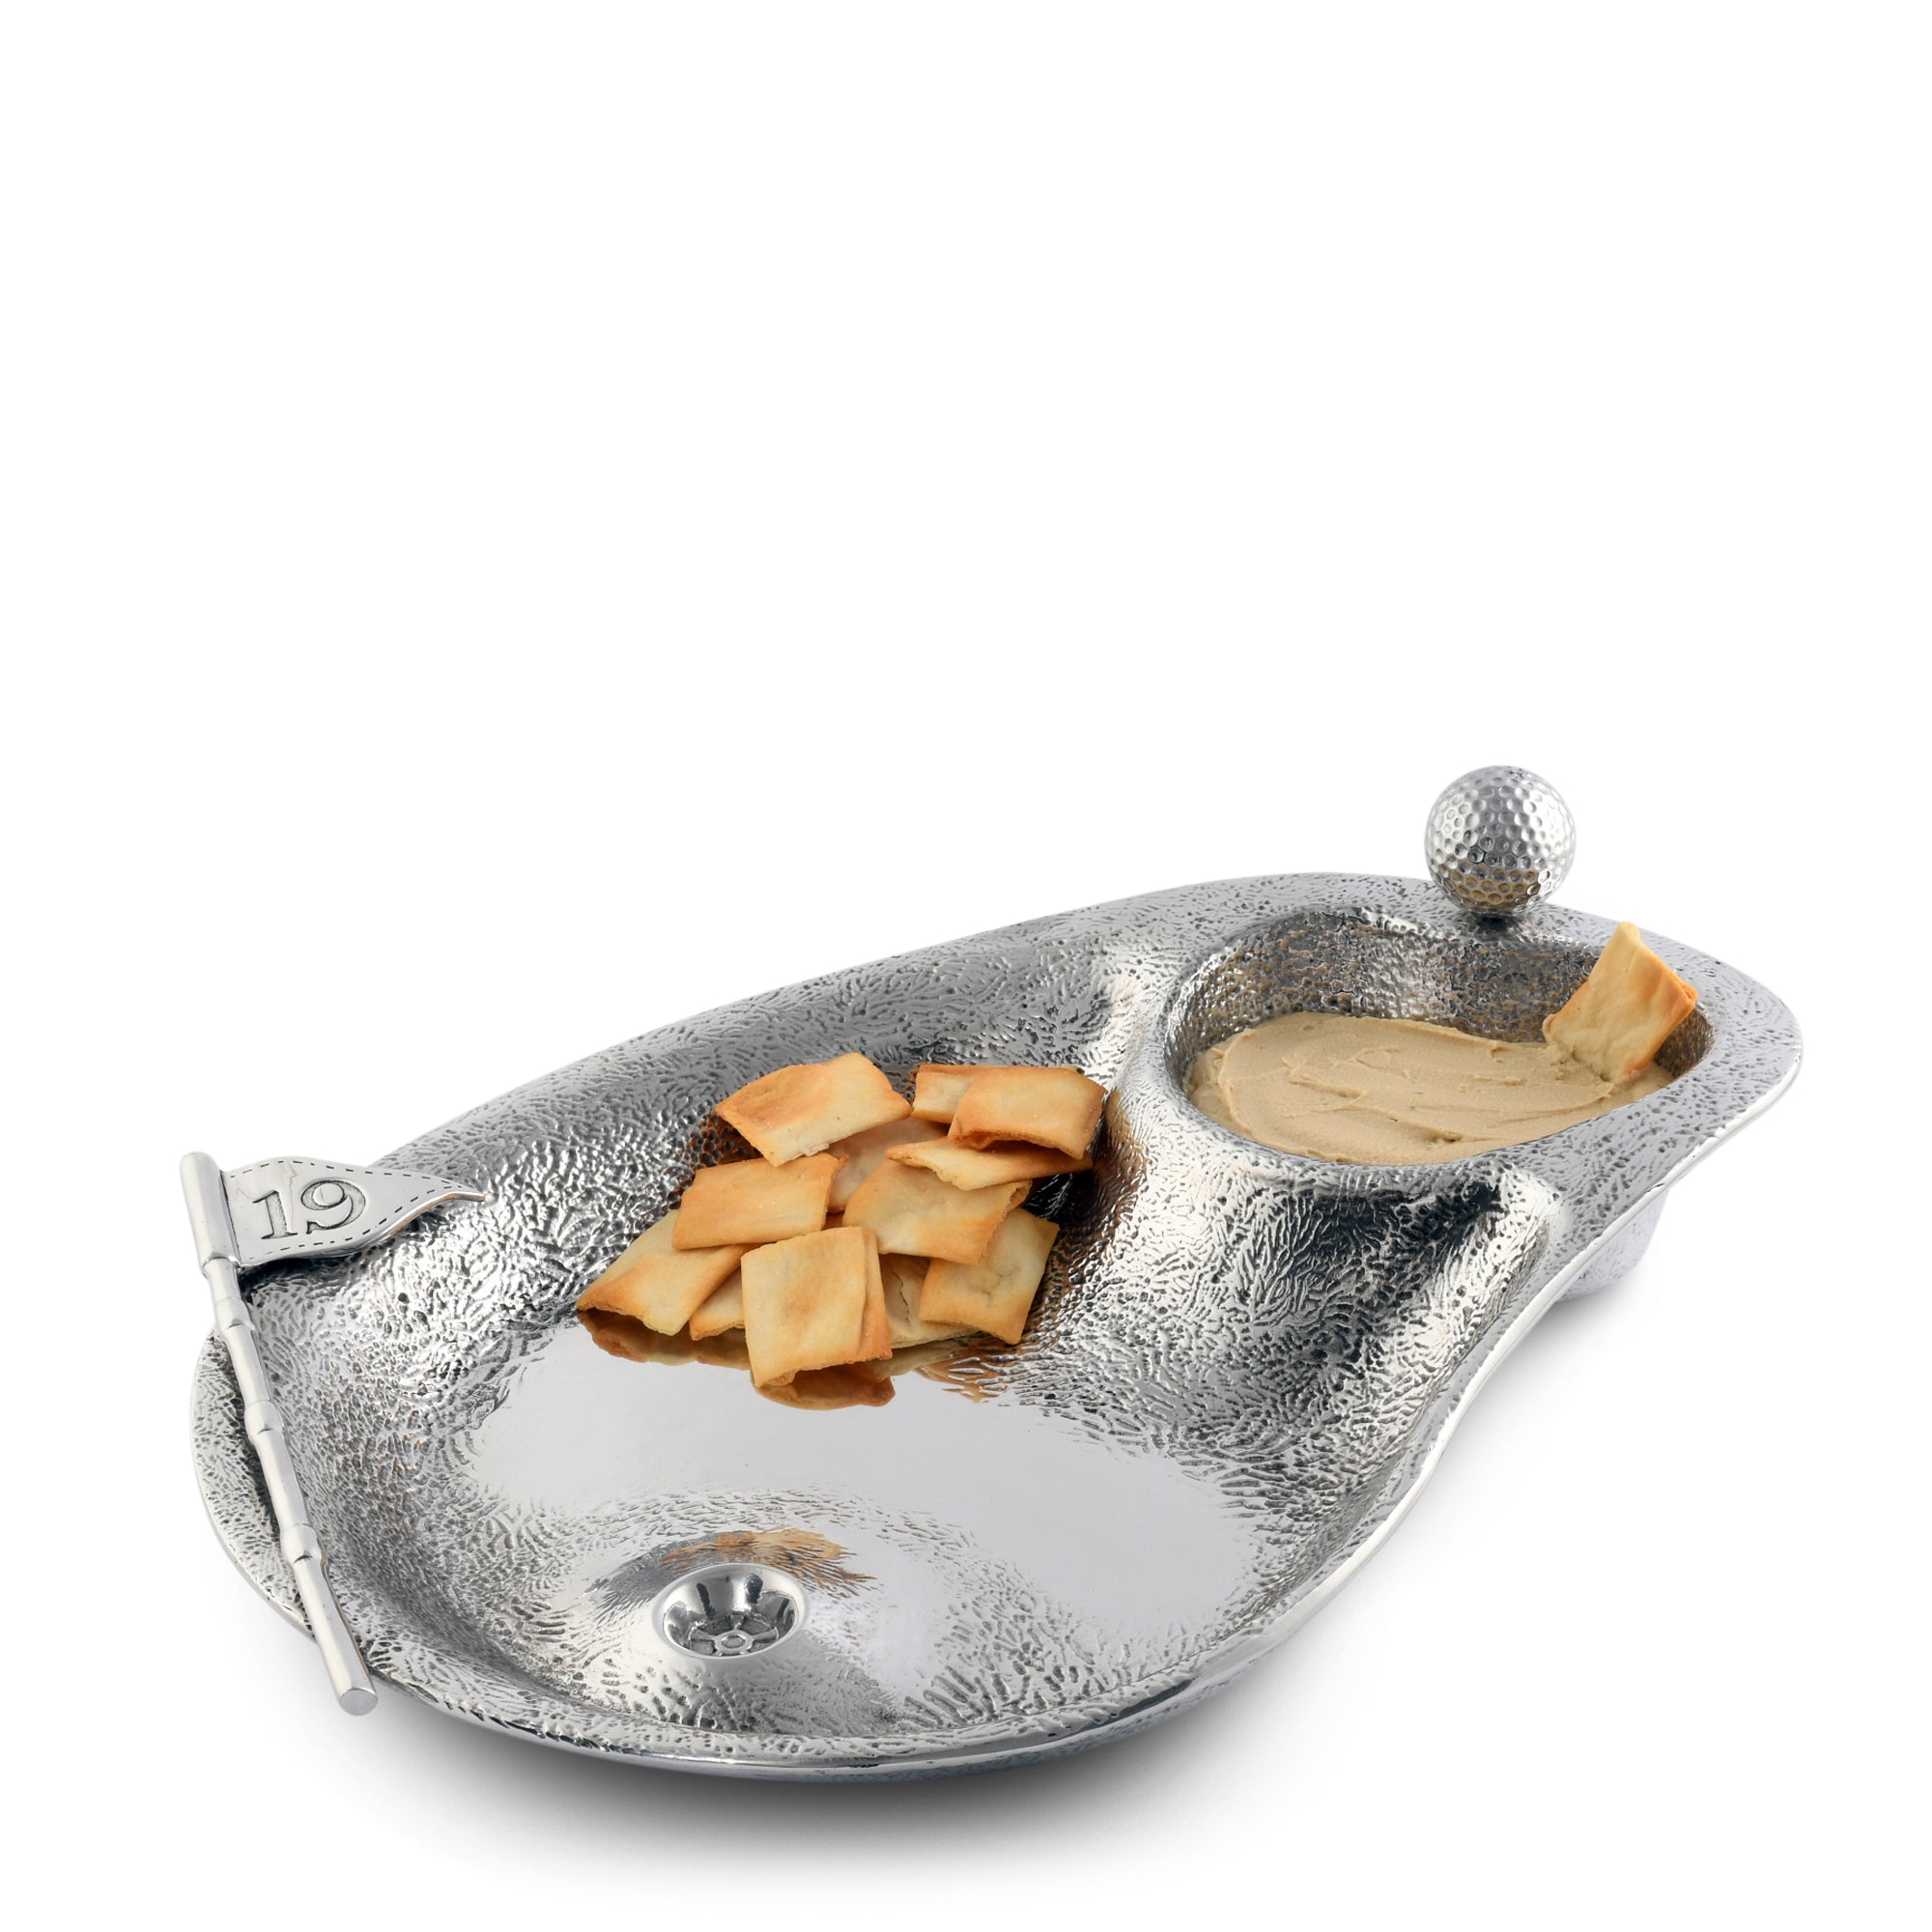 Vagabond House Chip and Dip Tray - Golf                      Product Image